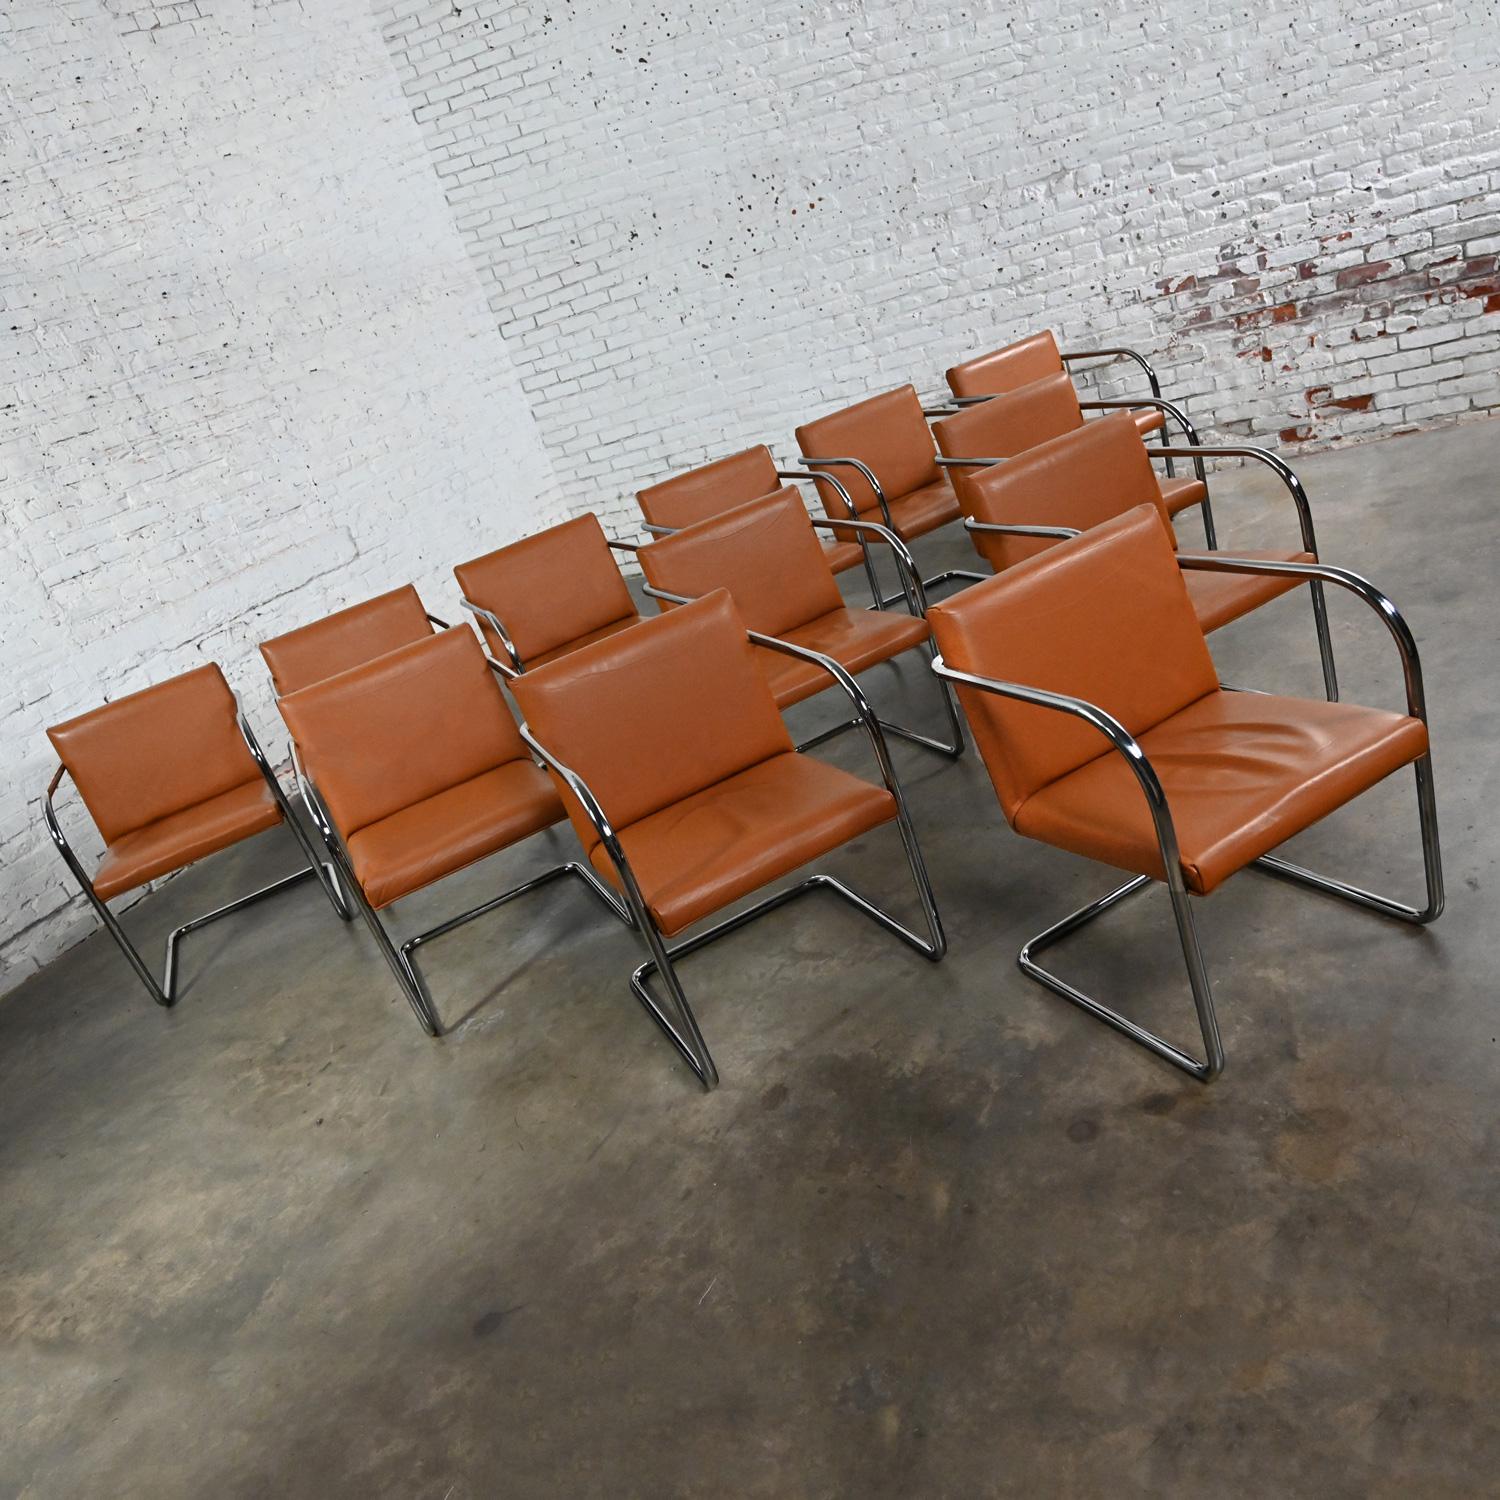 Thonet Bauhaus Brno Style Chairs Chrome & Cognac Leather Cantilever Set of 12  For Sale 3